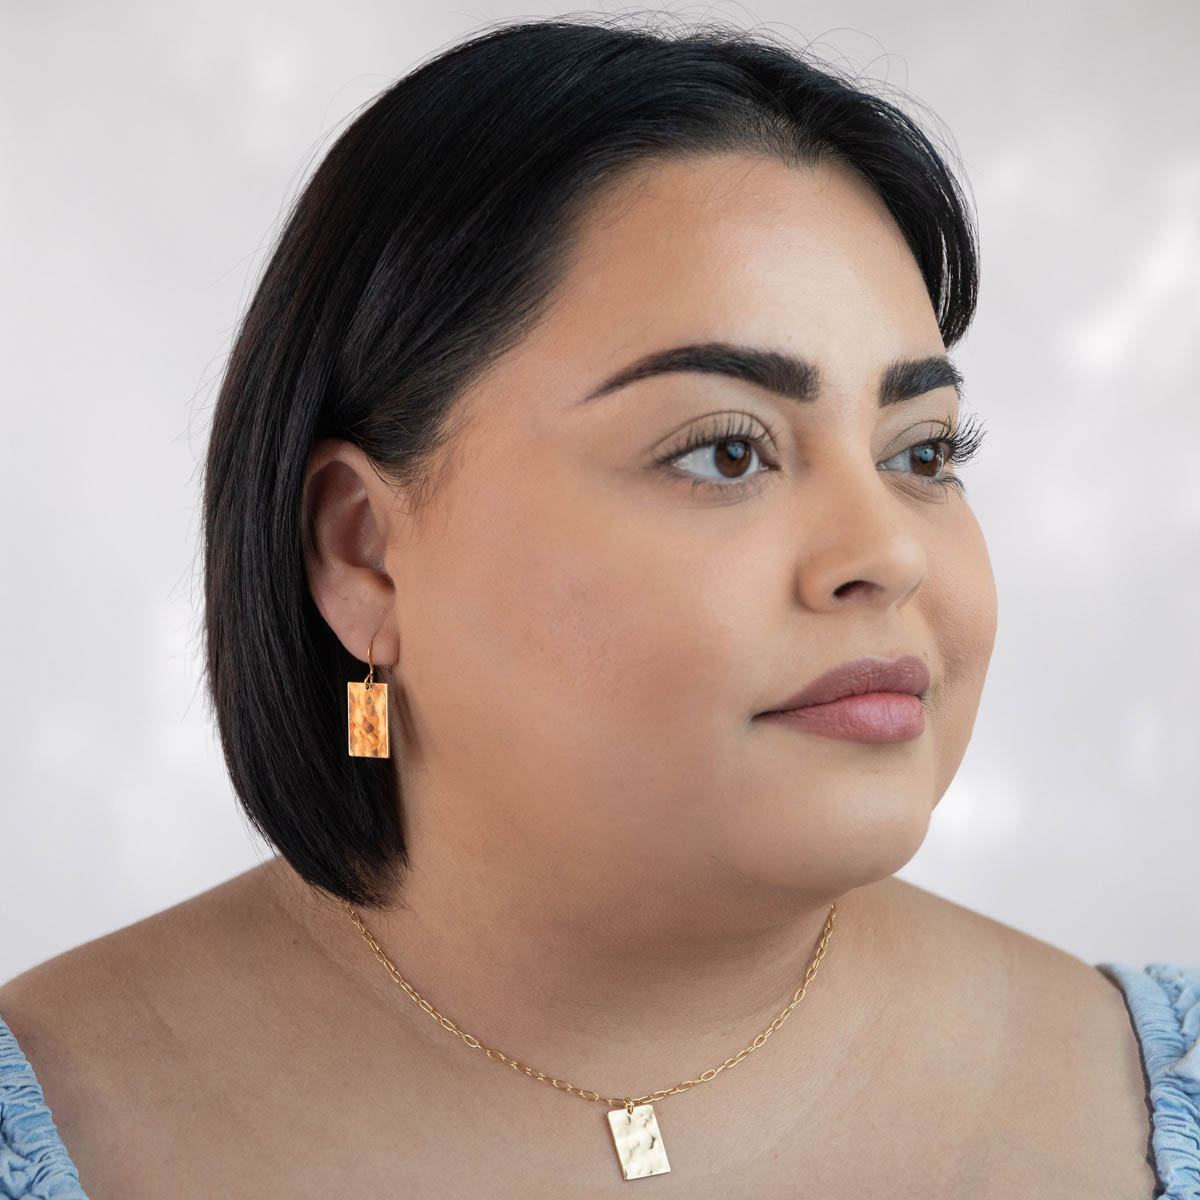 A woman in a blue blouse modeling the Zenith earrings, a gold tone hammer textured rectangle charm finished on french hooks.